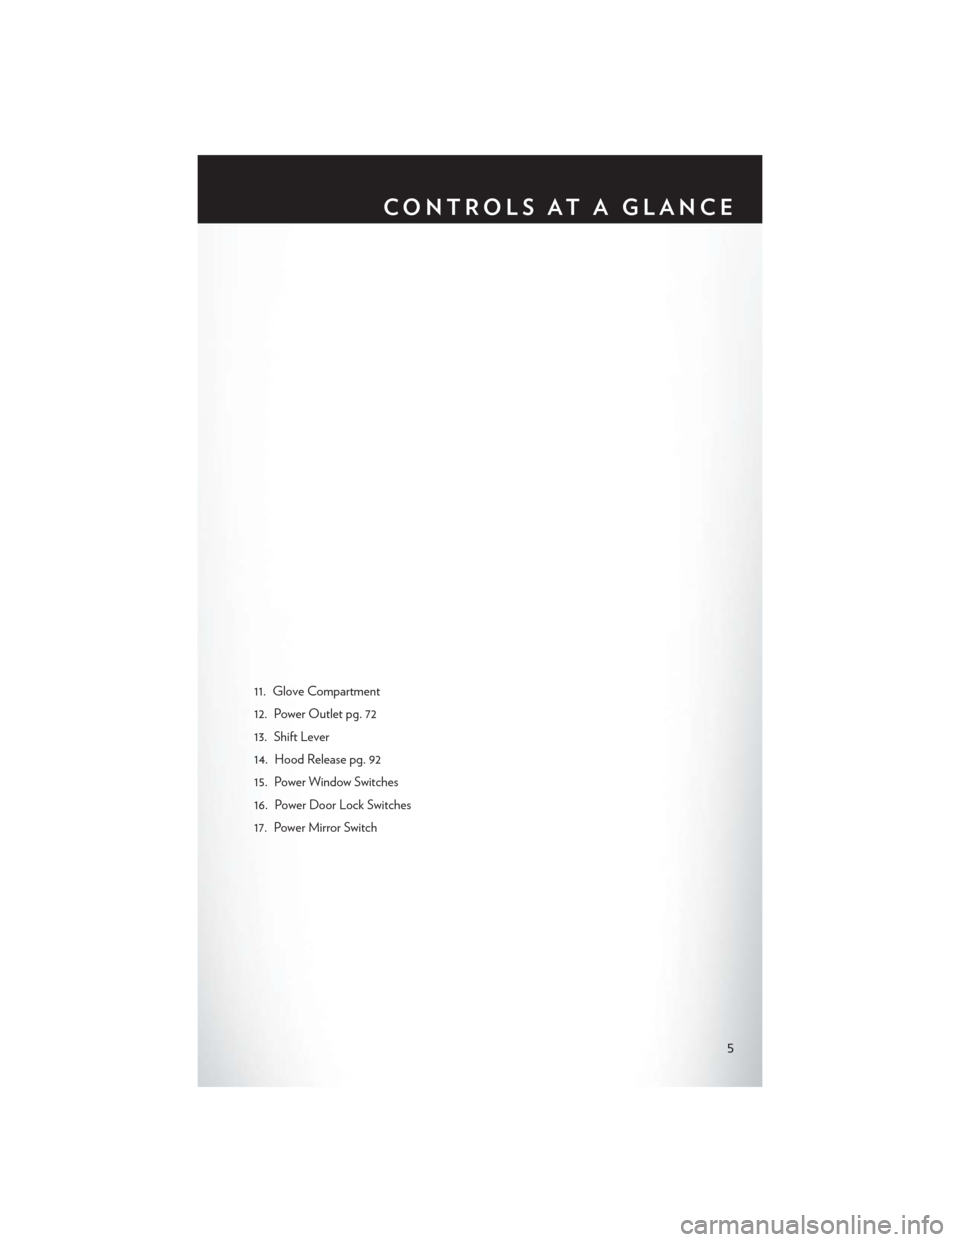 CHRYSLER 200 2014 1.G User Guide 11. Glove Compartment
12. Power Outlet pg. 72
13. Shift Lever
14. Hood Release pg. 92
15. Power Window Switches
16. Power Door Lock Switches
17. Power Mirror Switch
CONTROLS AT A GLANCE
5 